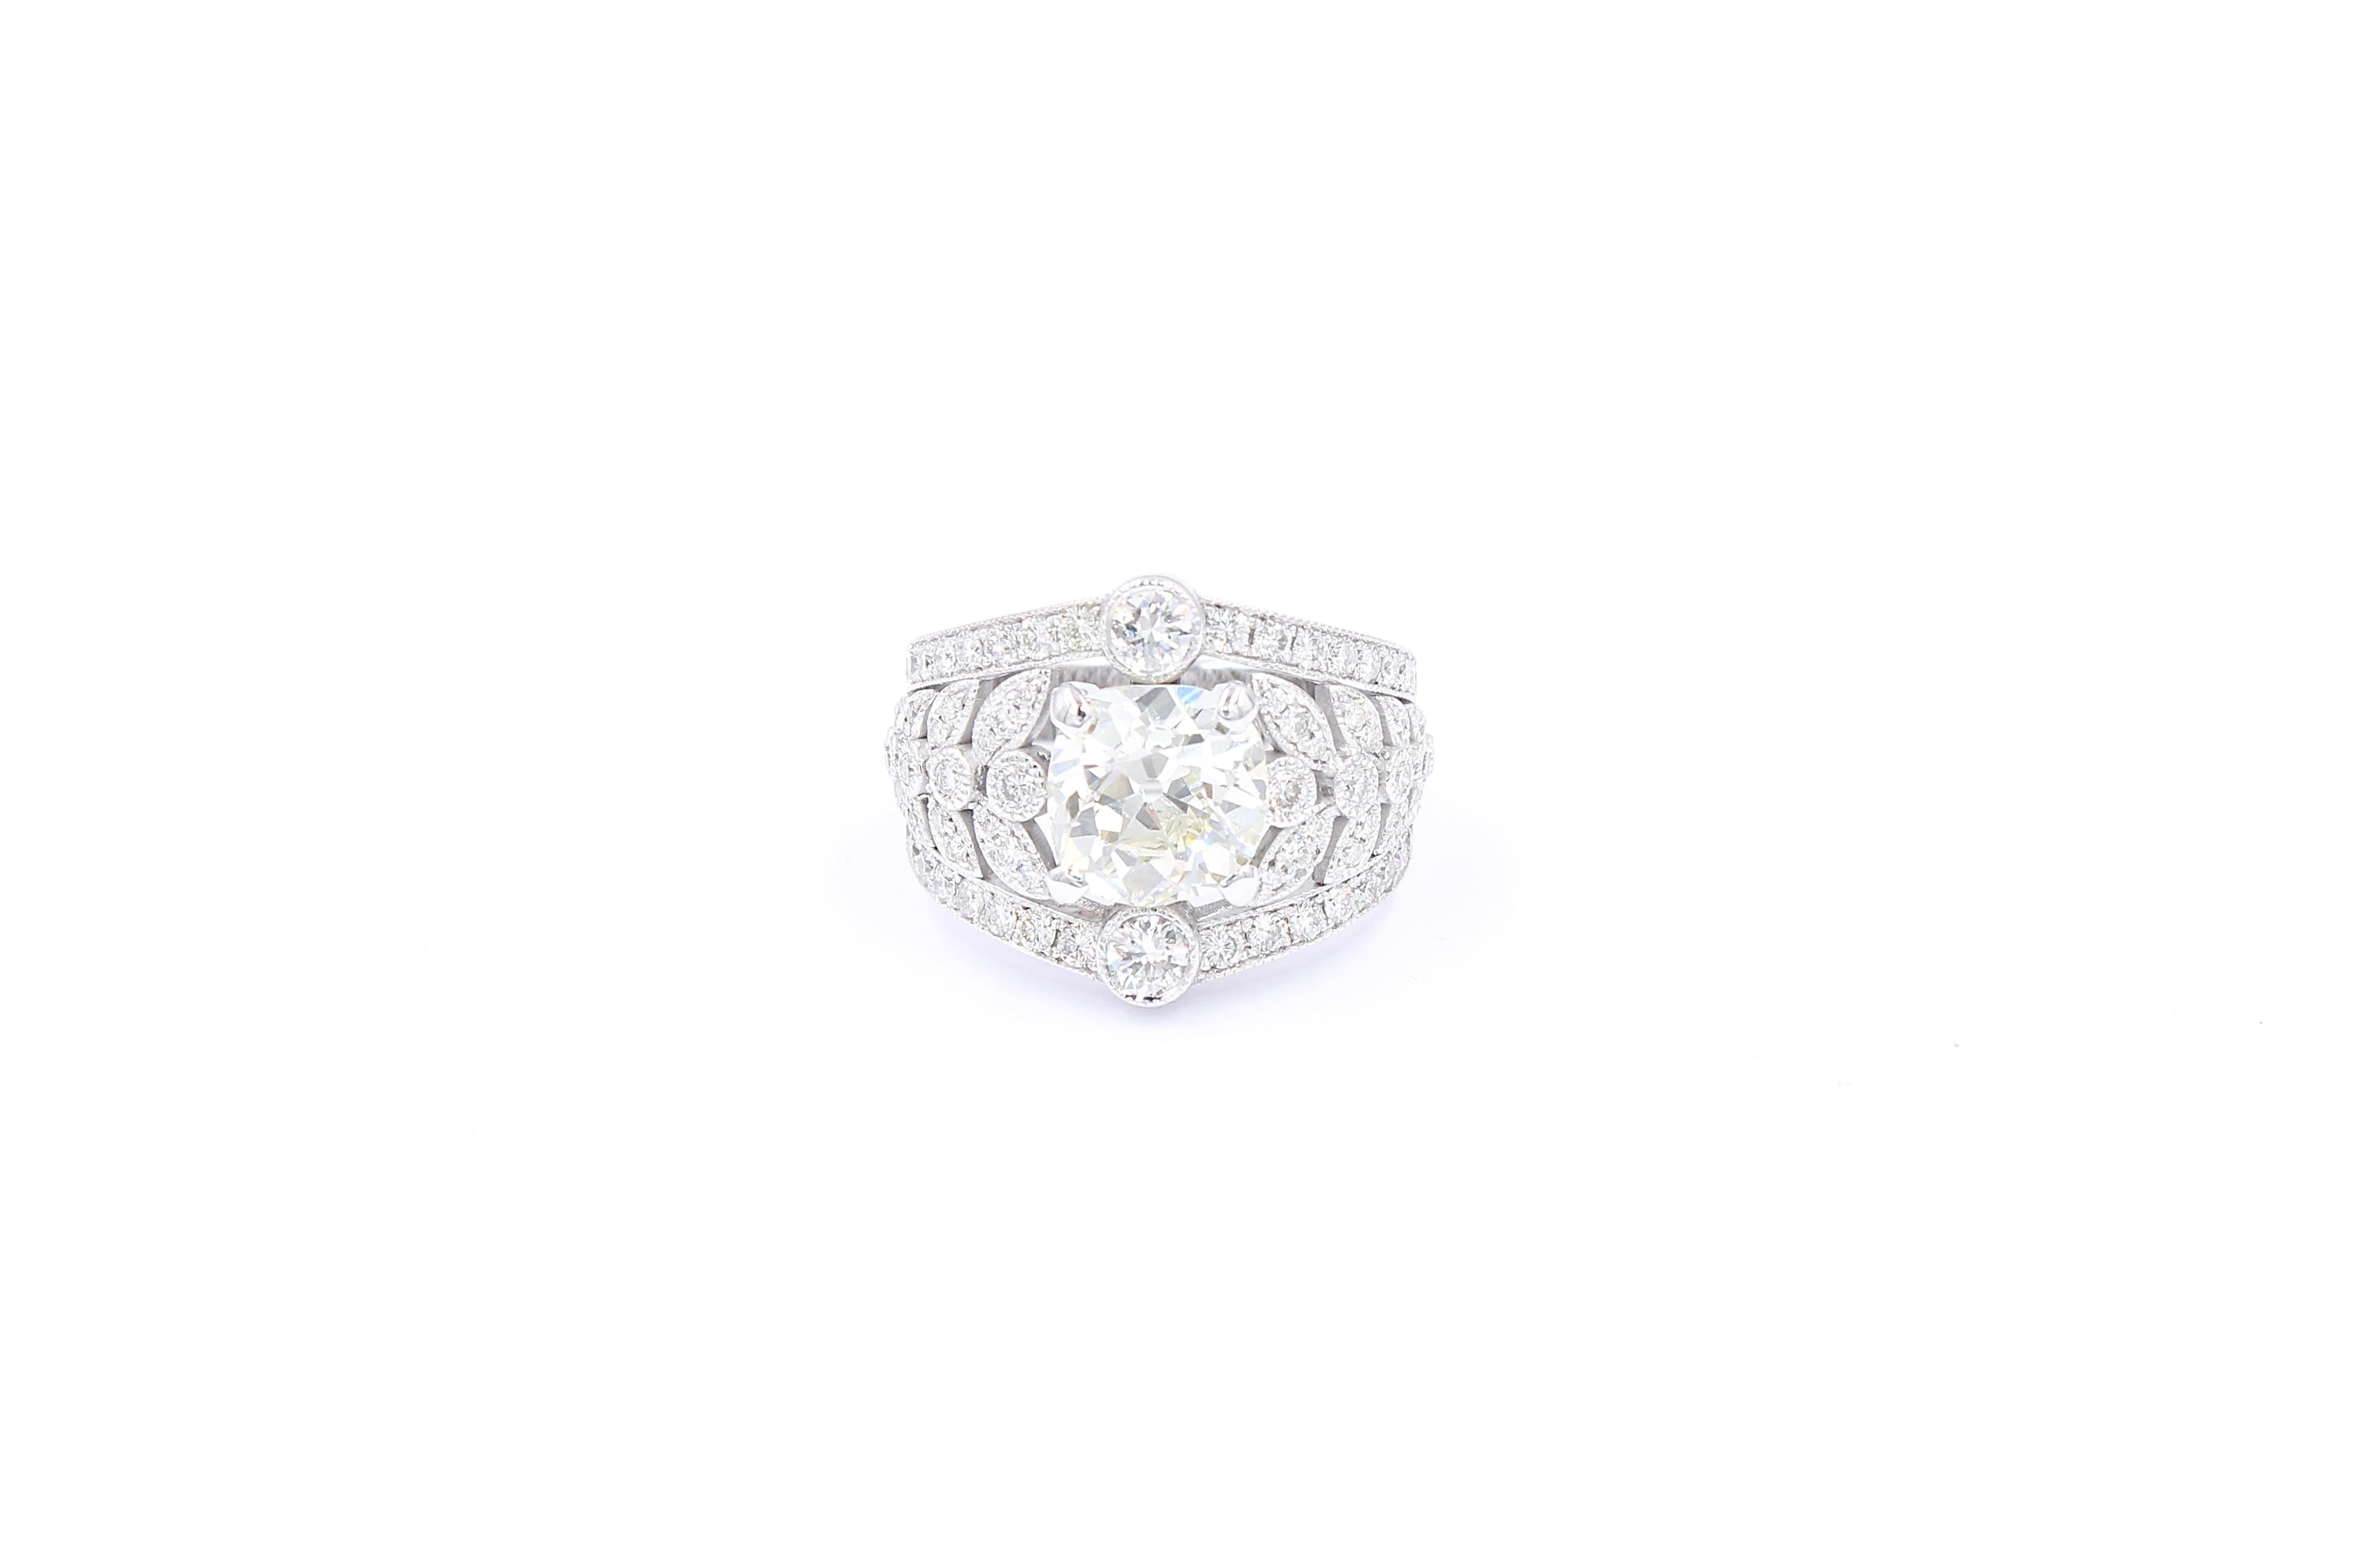 Ring made of white gold 18K set with a center 2.74 Carats old mine natural diamond (estimated J/K color - Vs clarity)  surrounded by 88 diamonds for a total of  1.20 Carats brilliant diamonds (G /H color - Vs clarity). 

The ring have been made by